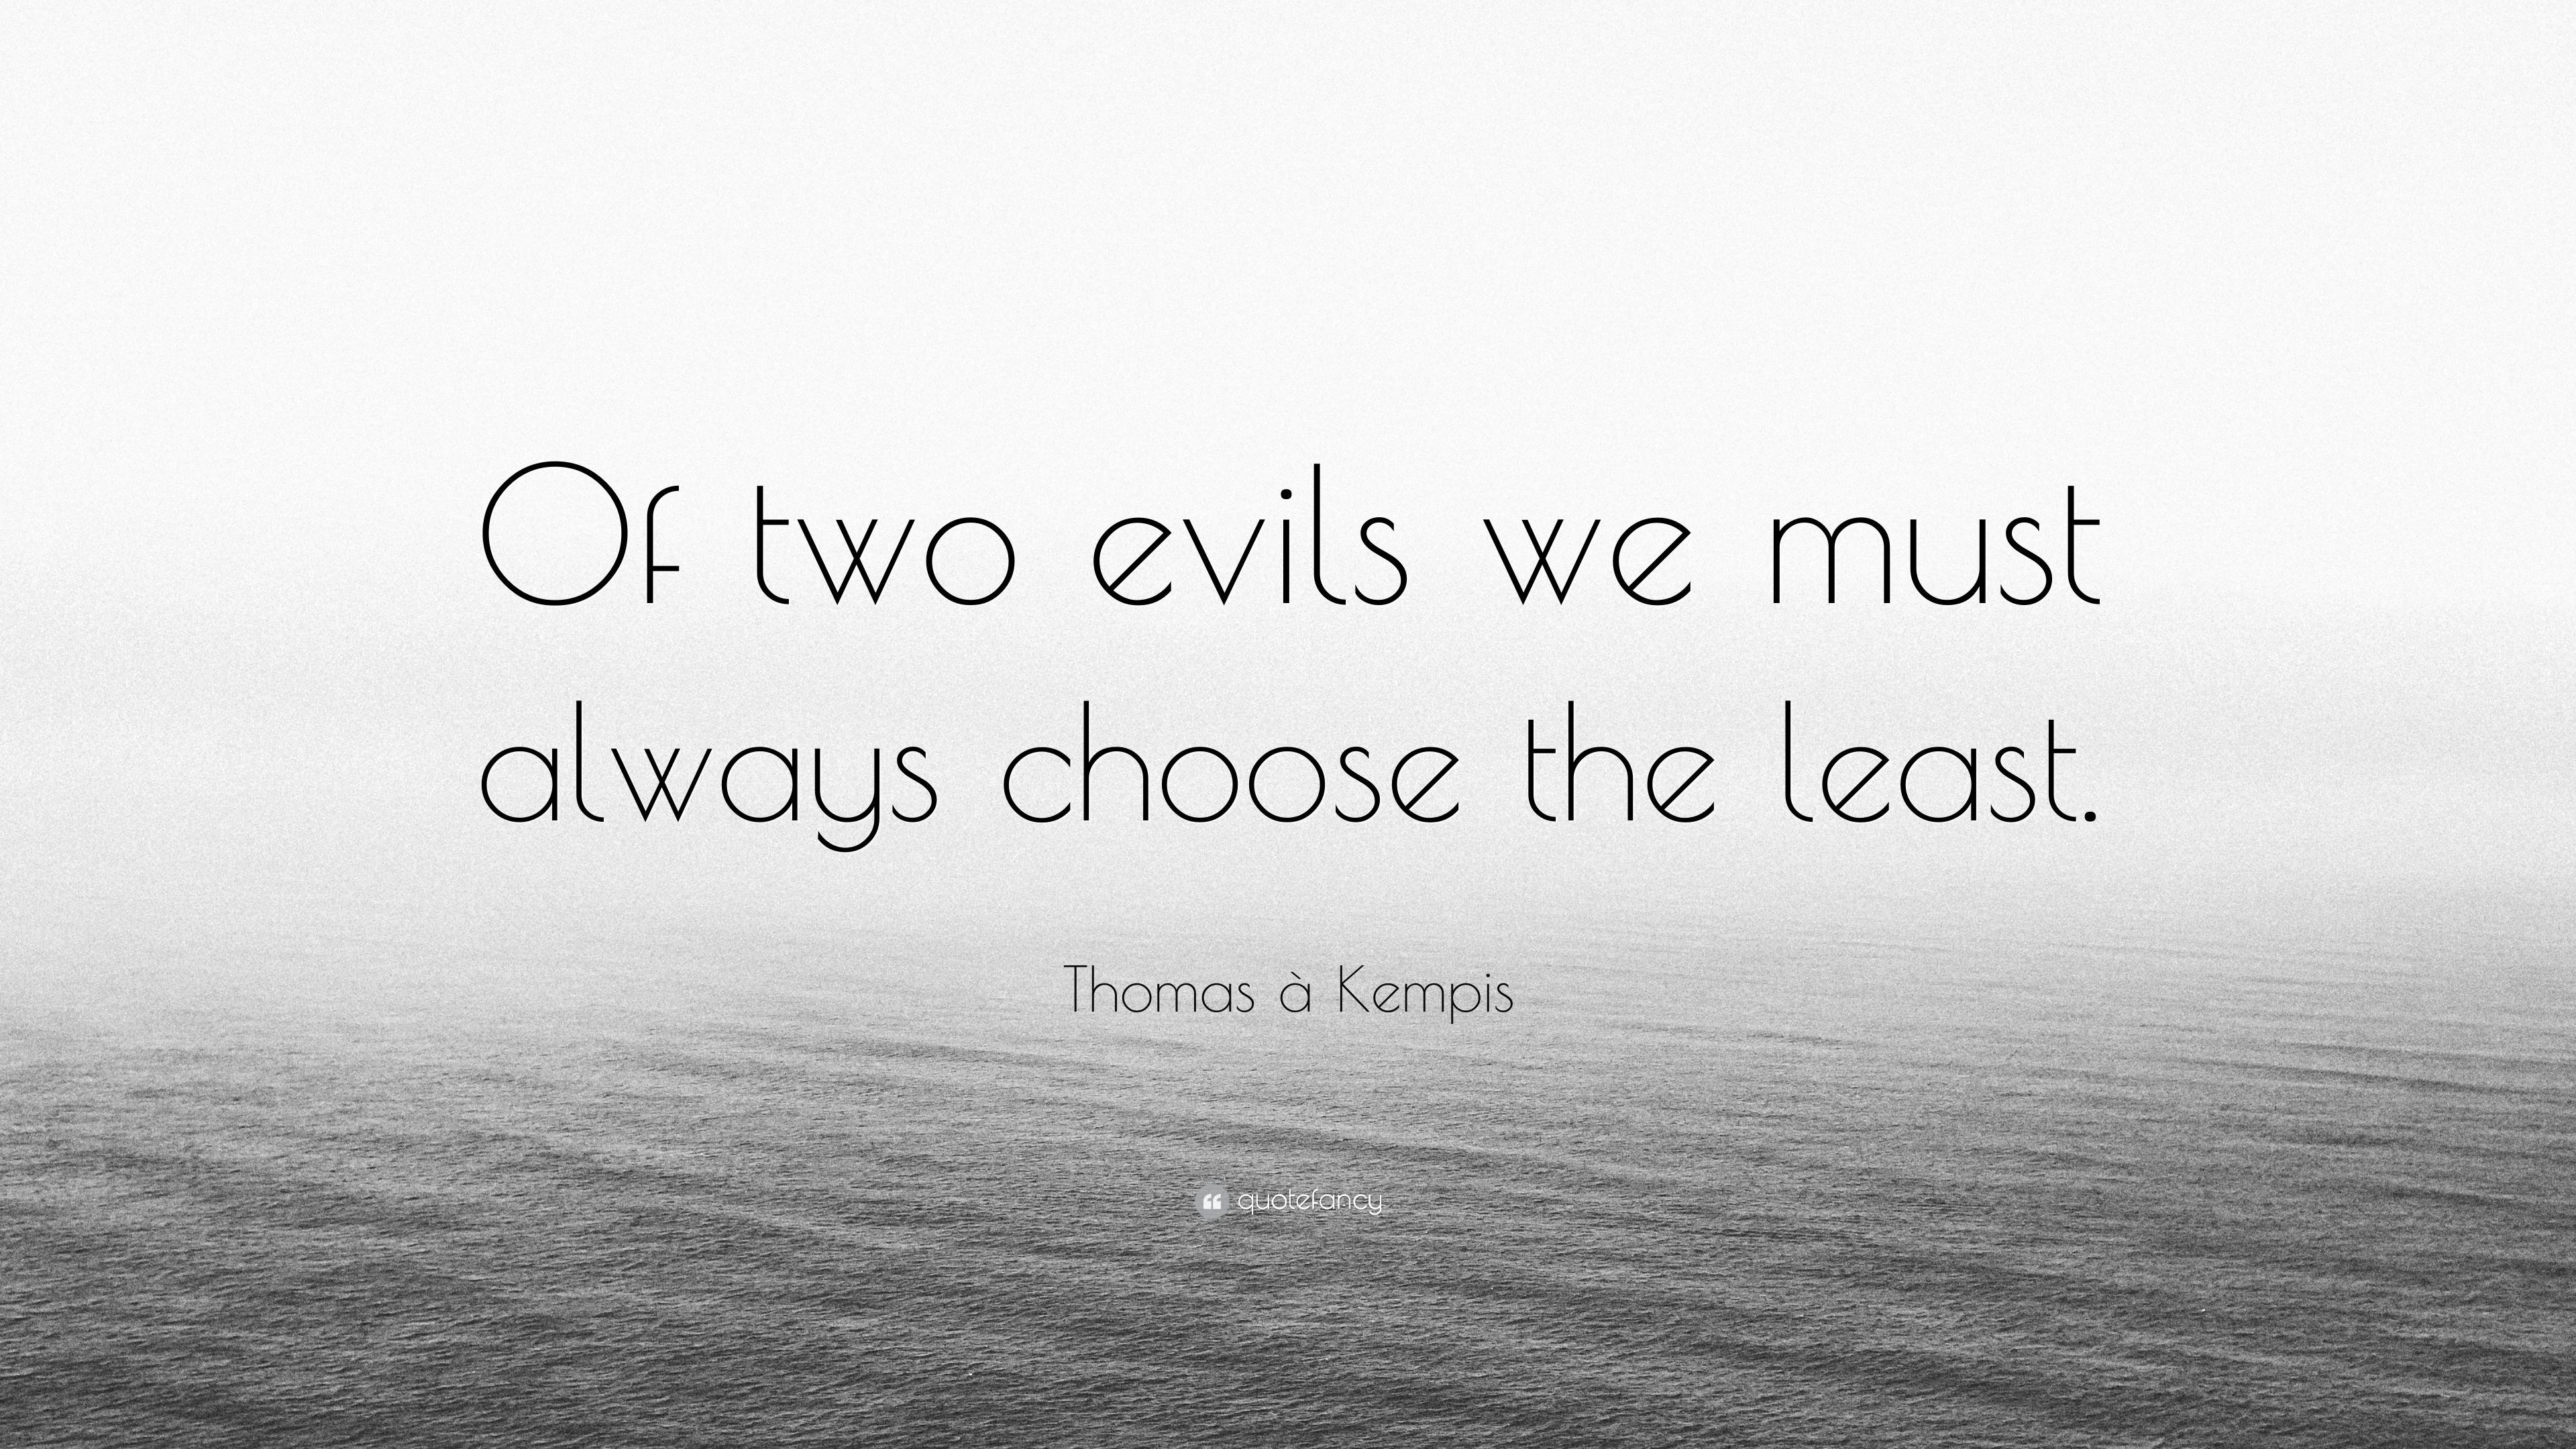 Thomas à Kempis Quote: “Of two evils we must always choose the least